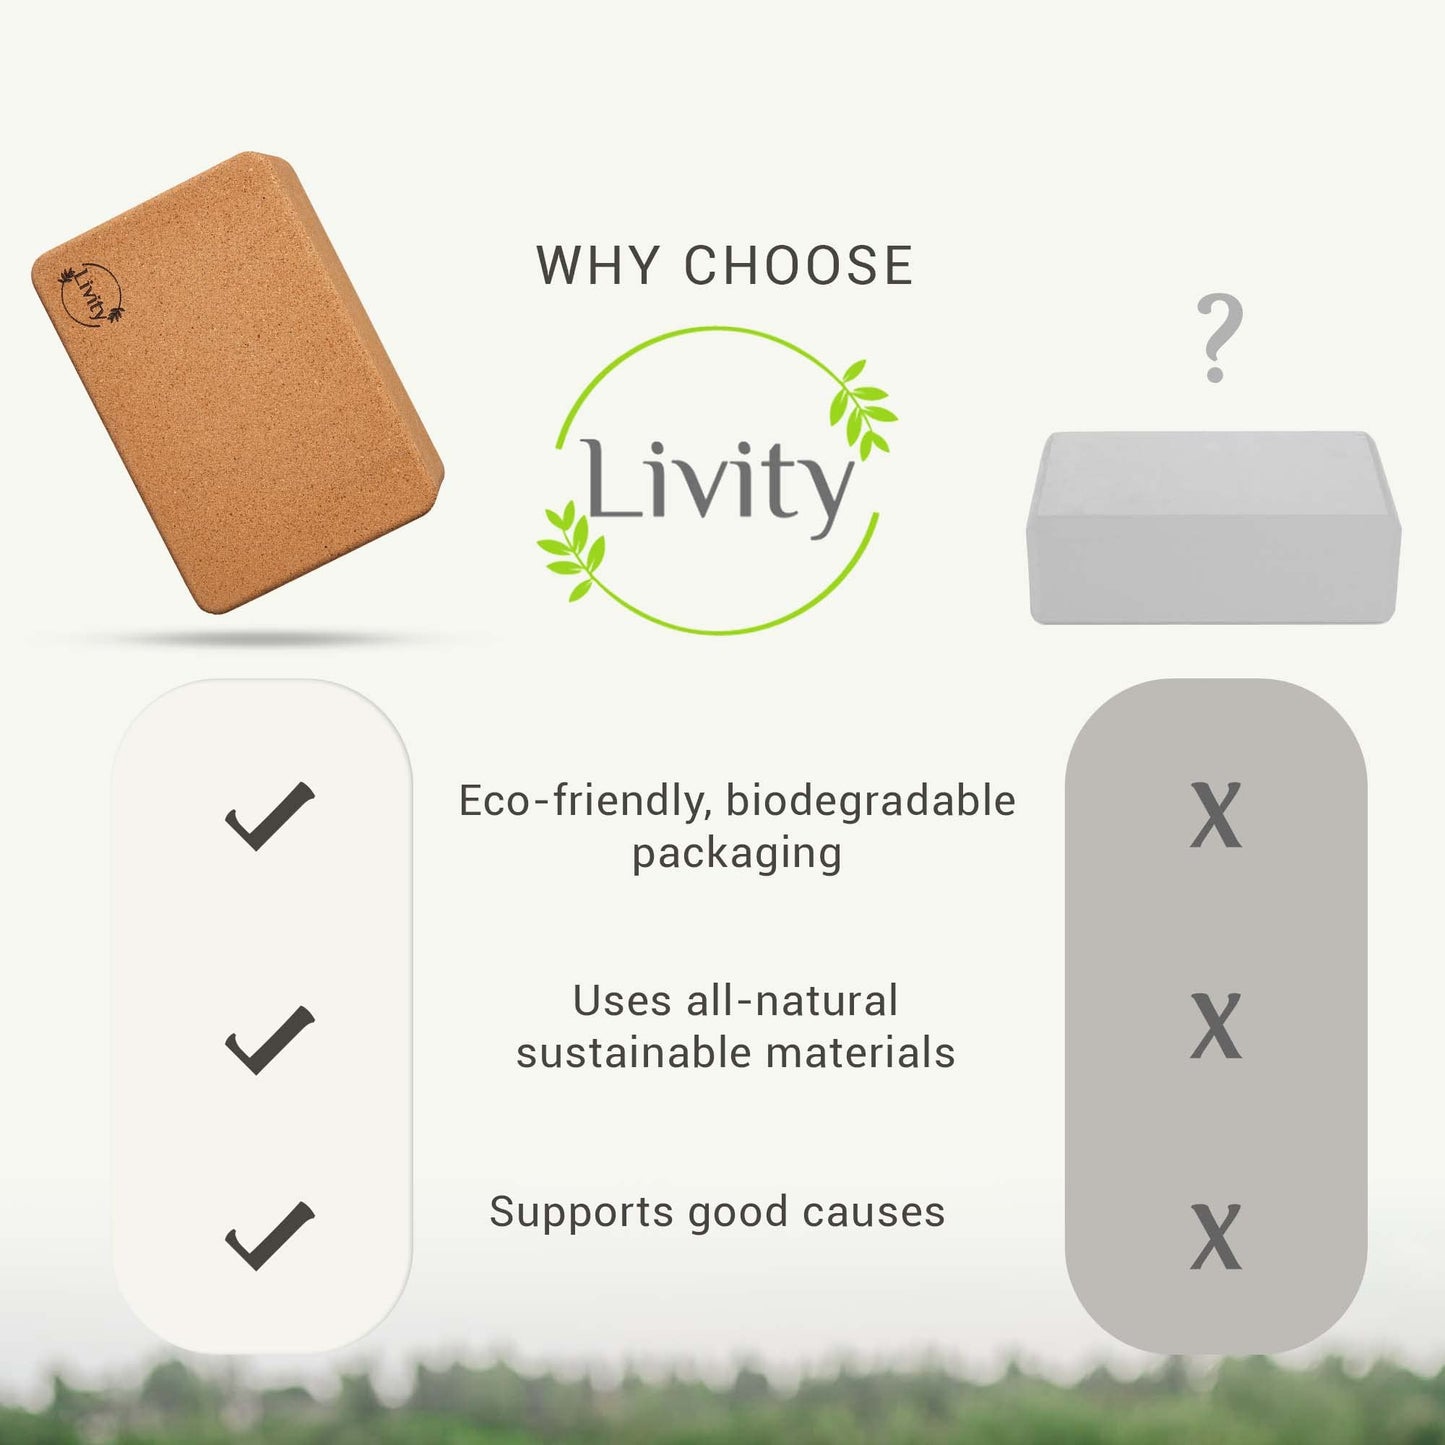 Livity Yoga - Cork Yoga Block, Natural Cork Block, Resilient Cork Exercise Block for Balance and Alignment During Stretching, Pilates, & Meditation, 9 x 6 x 3 inches